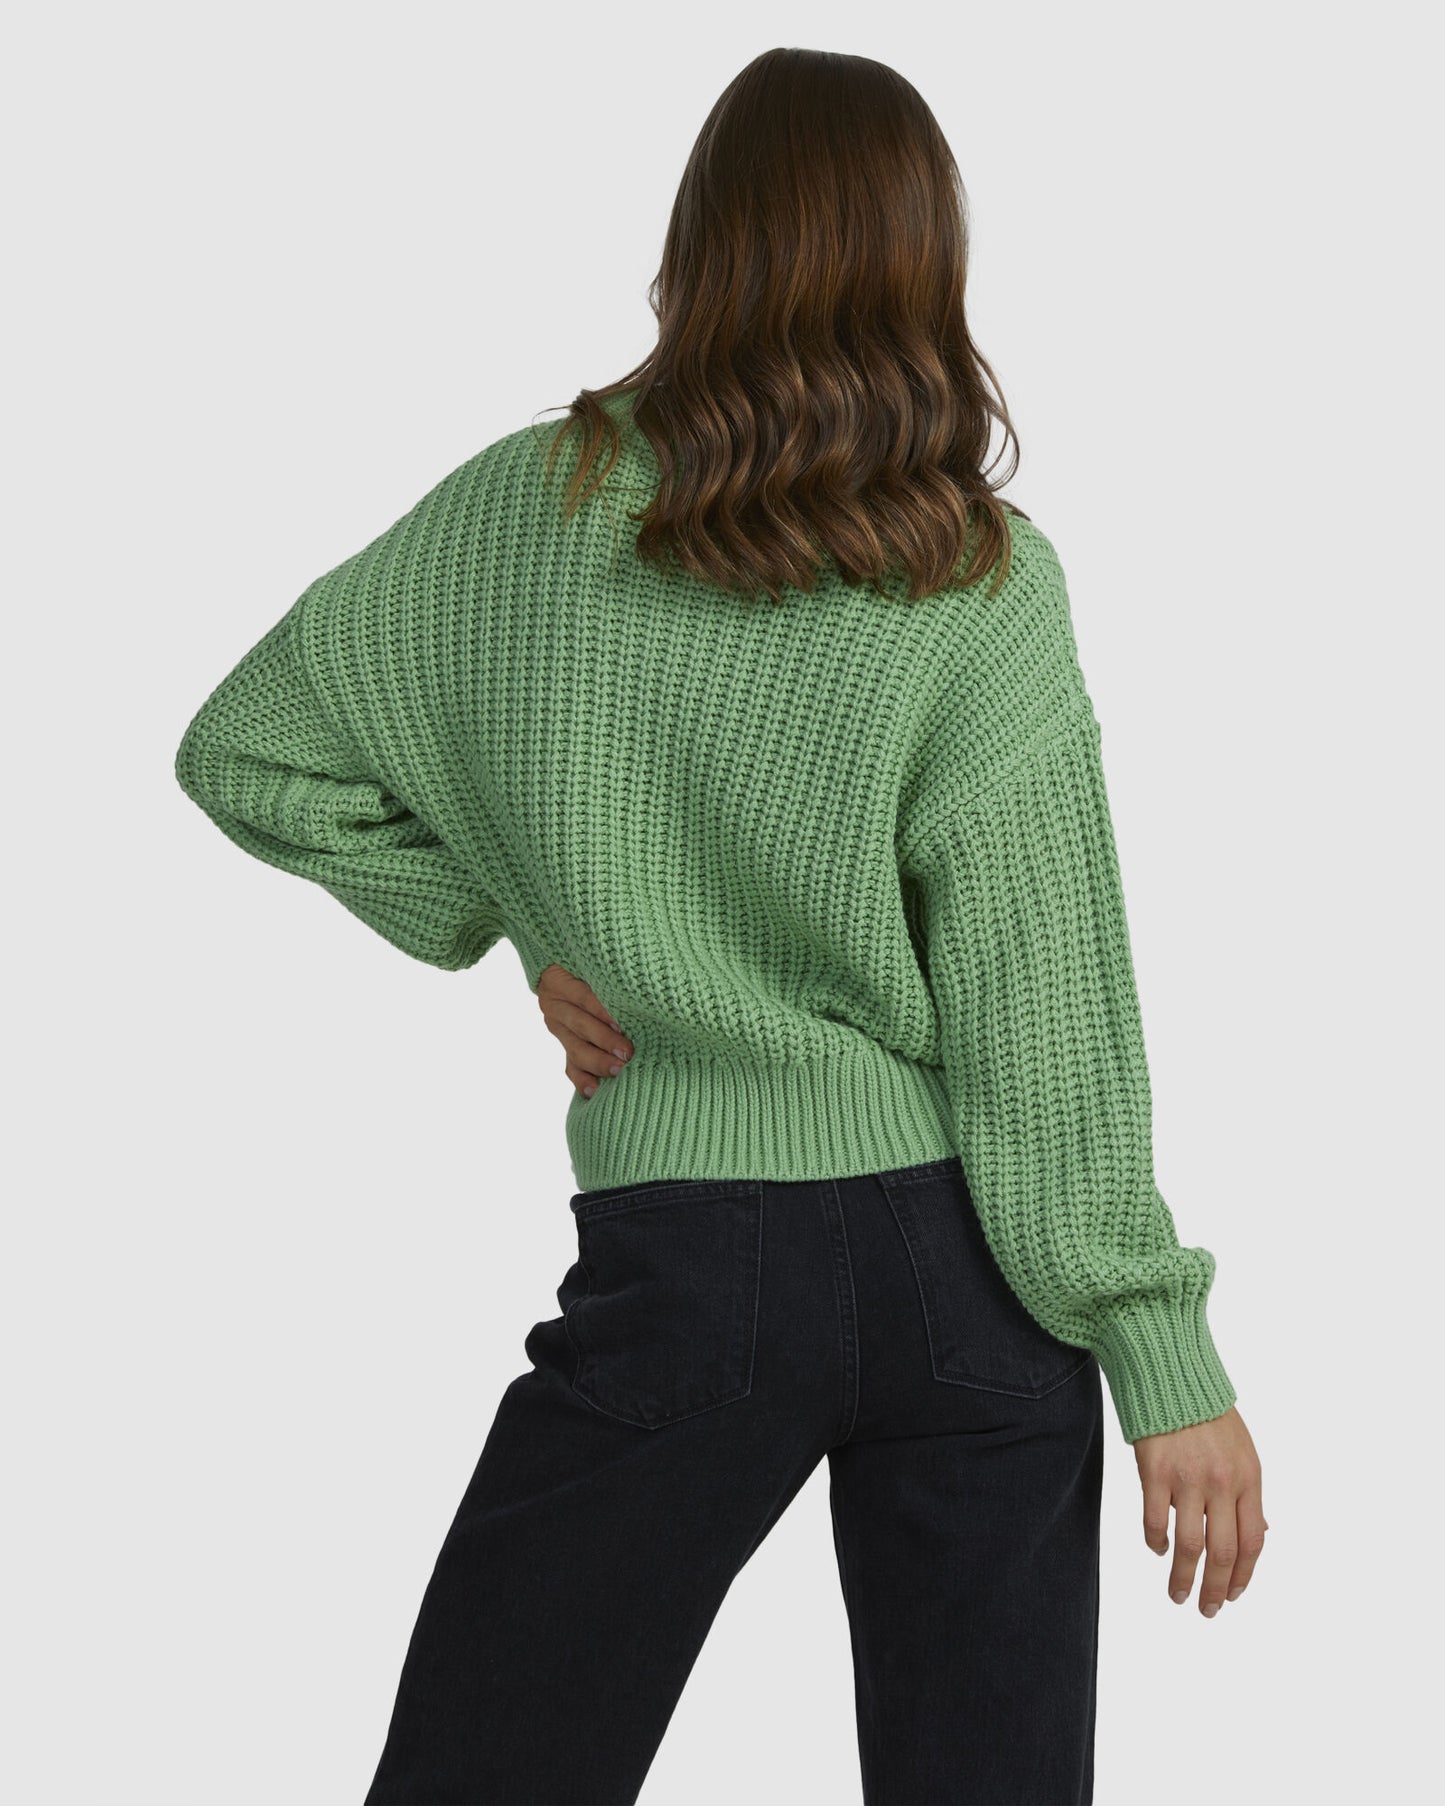 Roxy Coming Home Knit Sweater Green